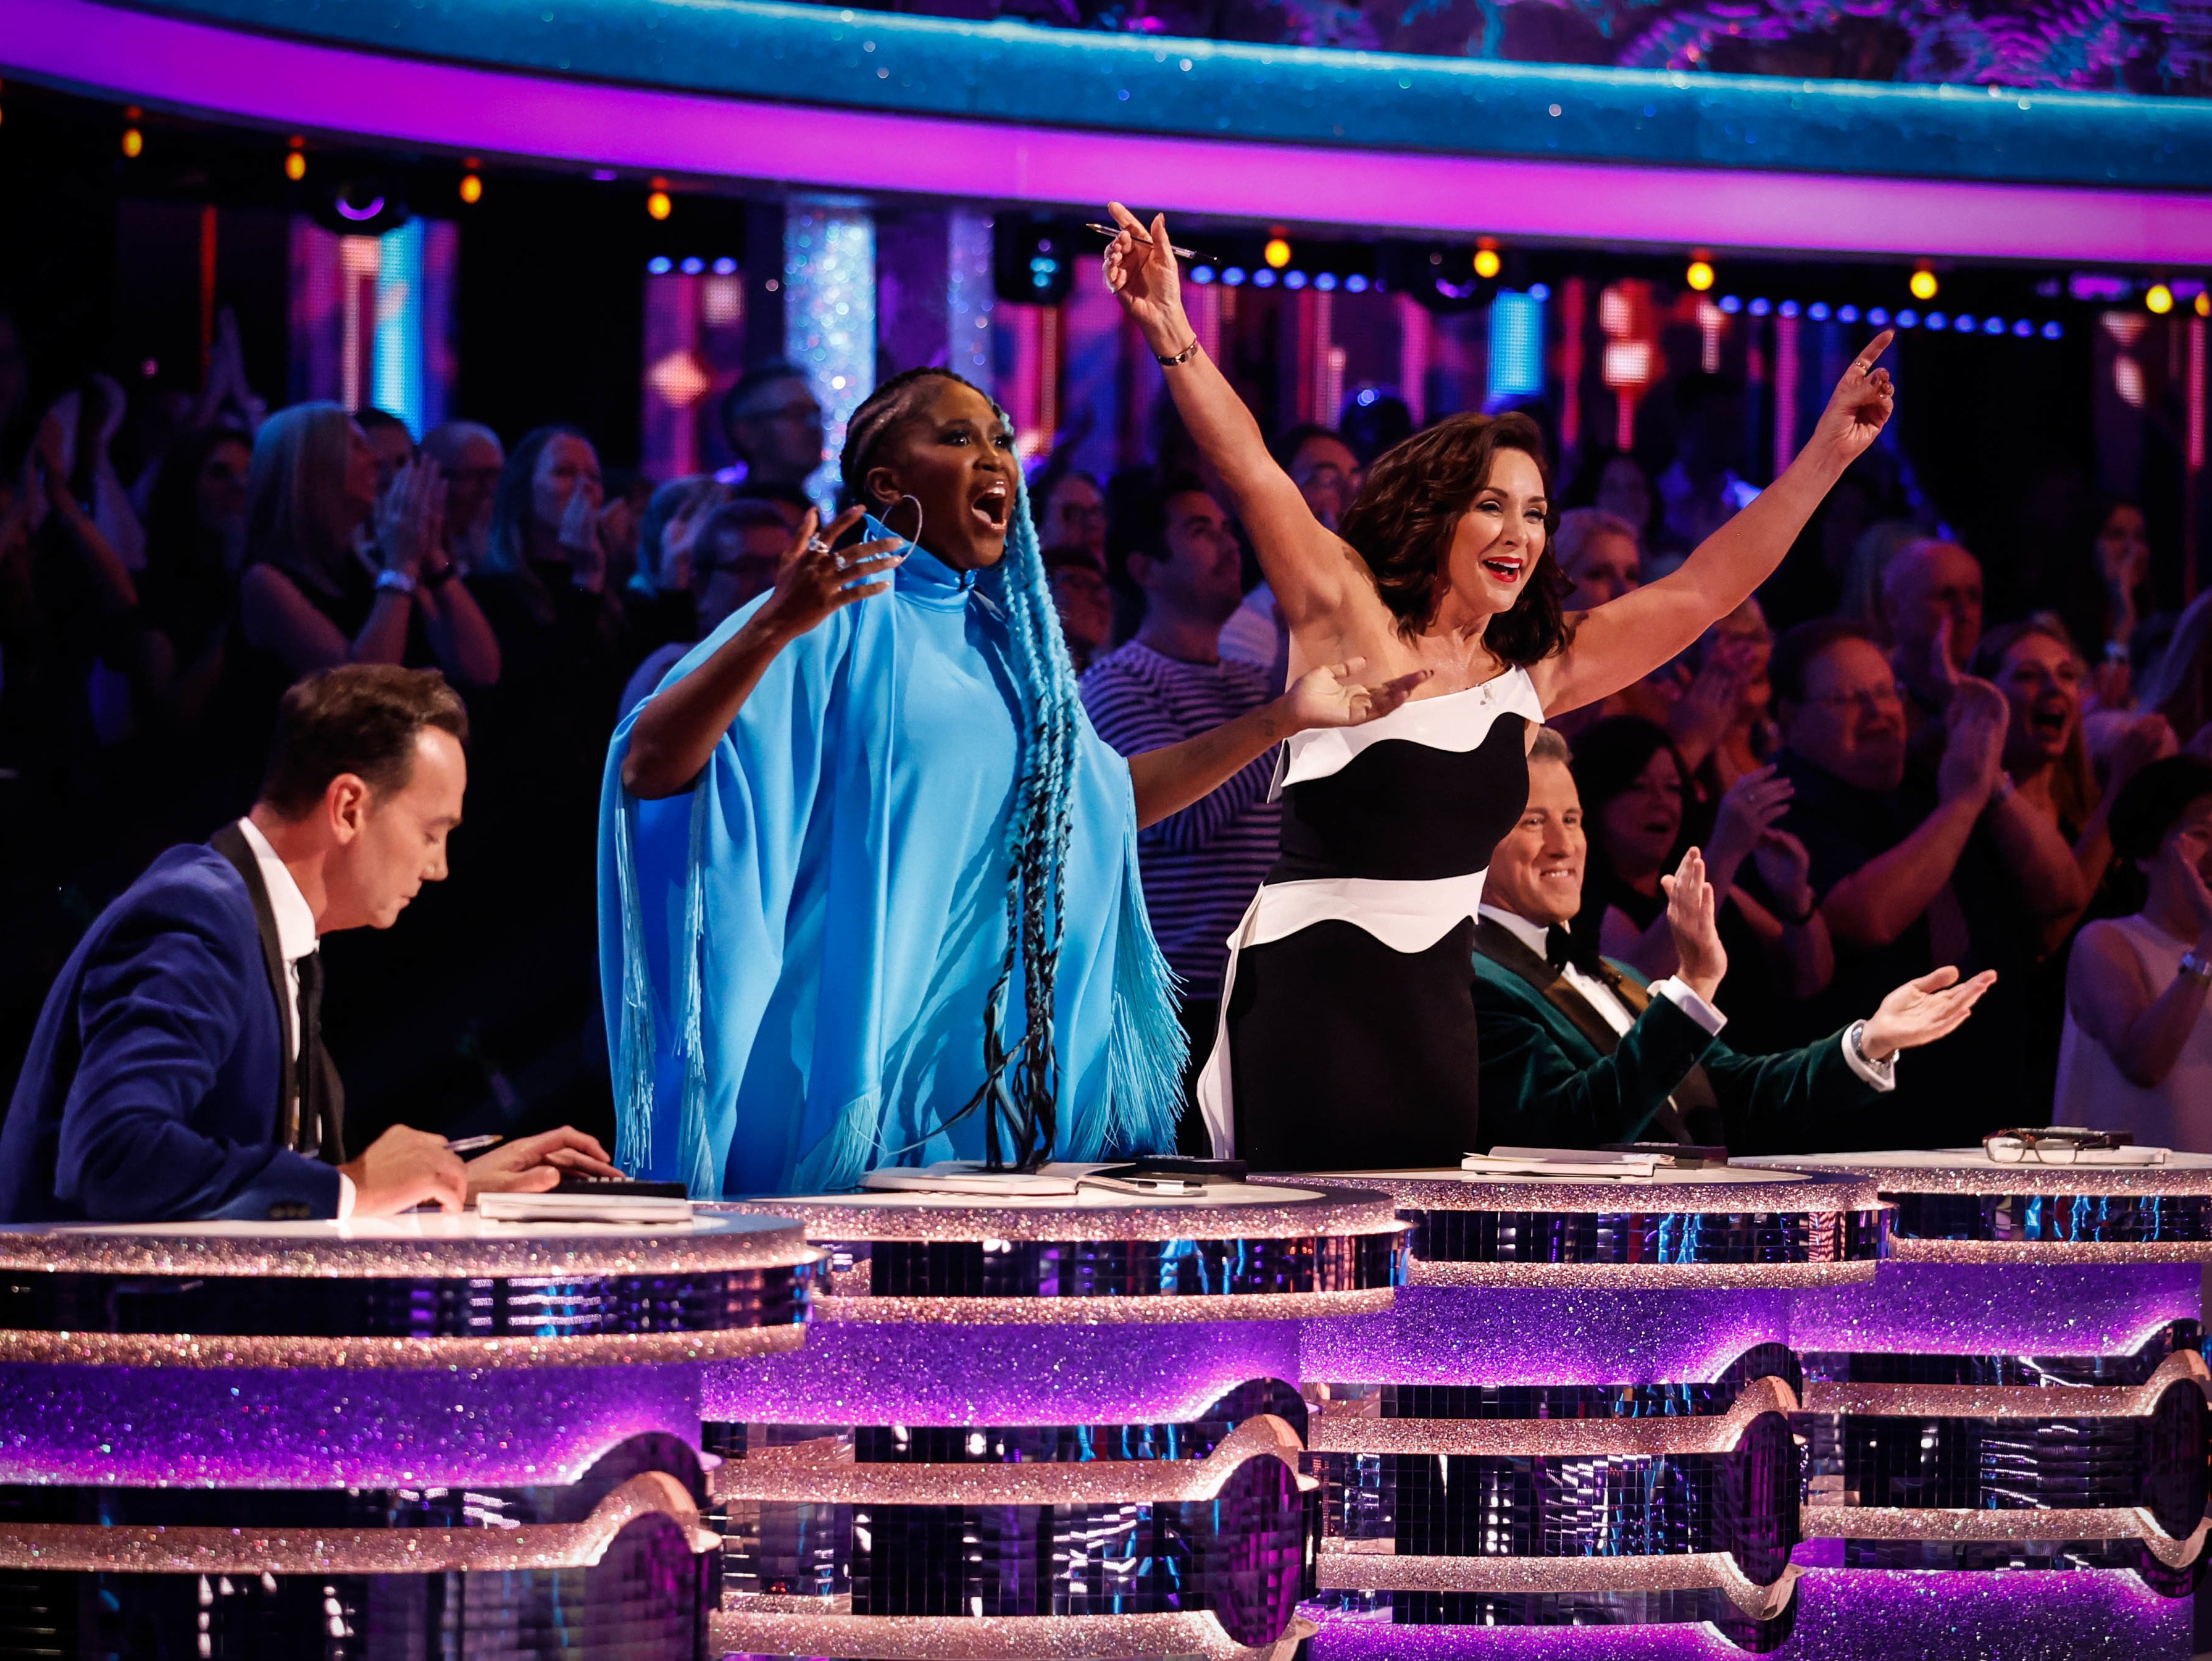 Viewers have concluded that Ballas (second right) shows preferential treatment to the male celebrities while picking on a certain type of female contestant